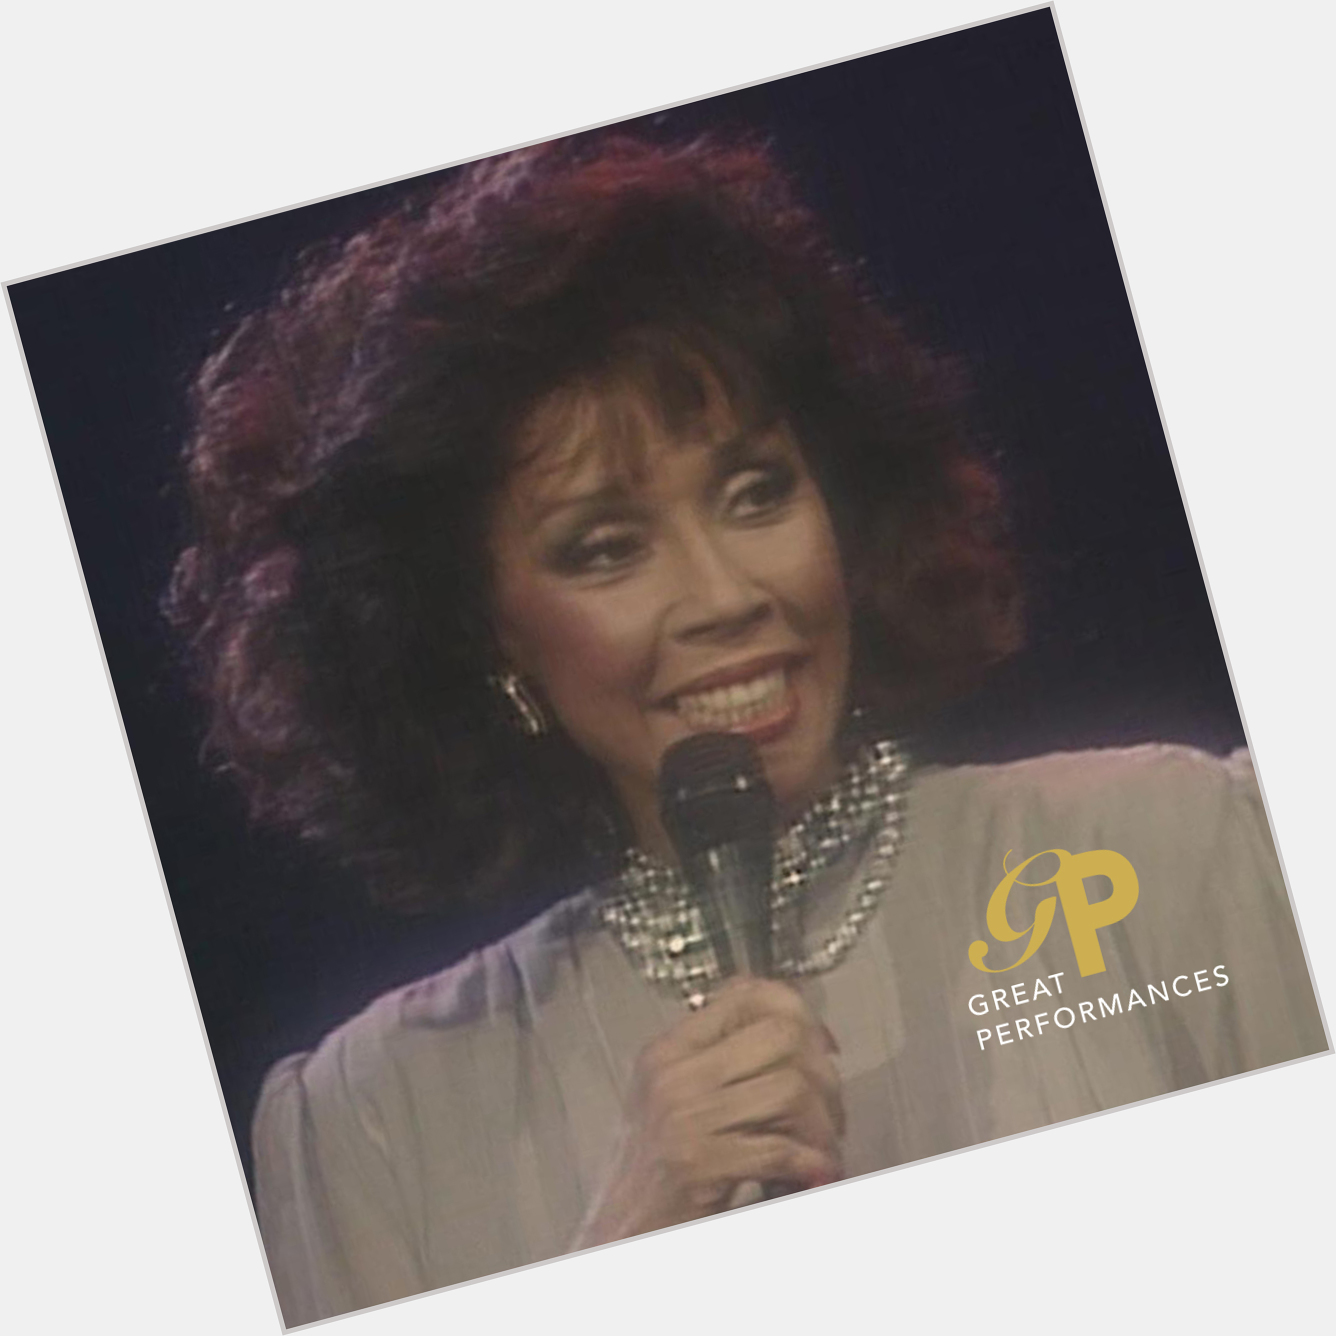 Happy birthday to the late Diahann Carroll. What was your favorite role of hers? 